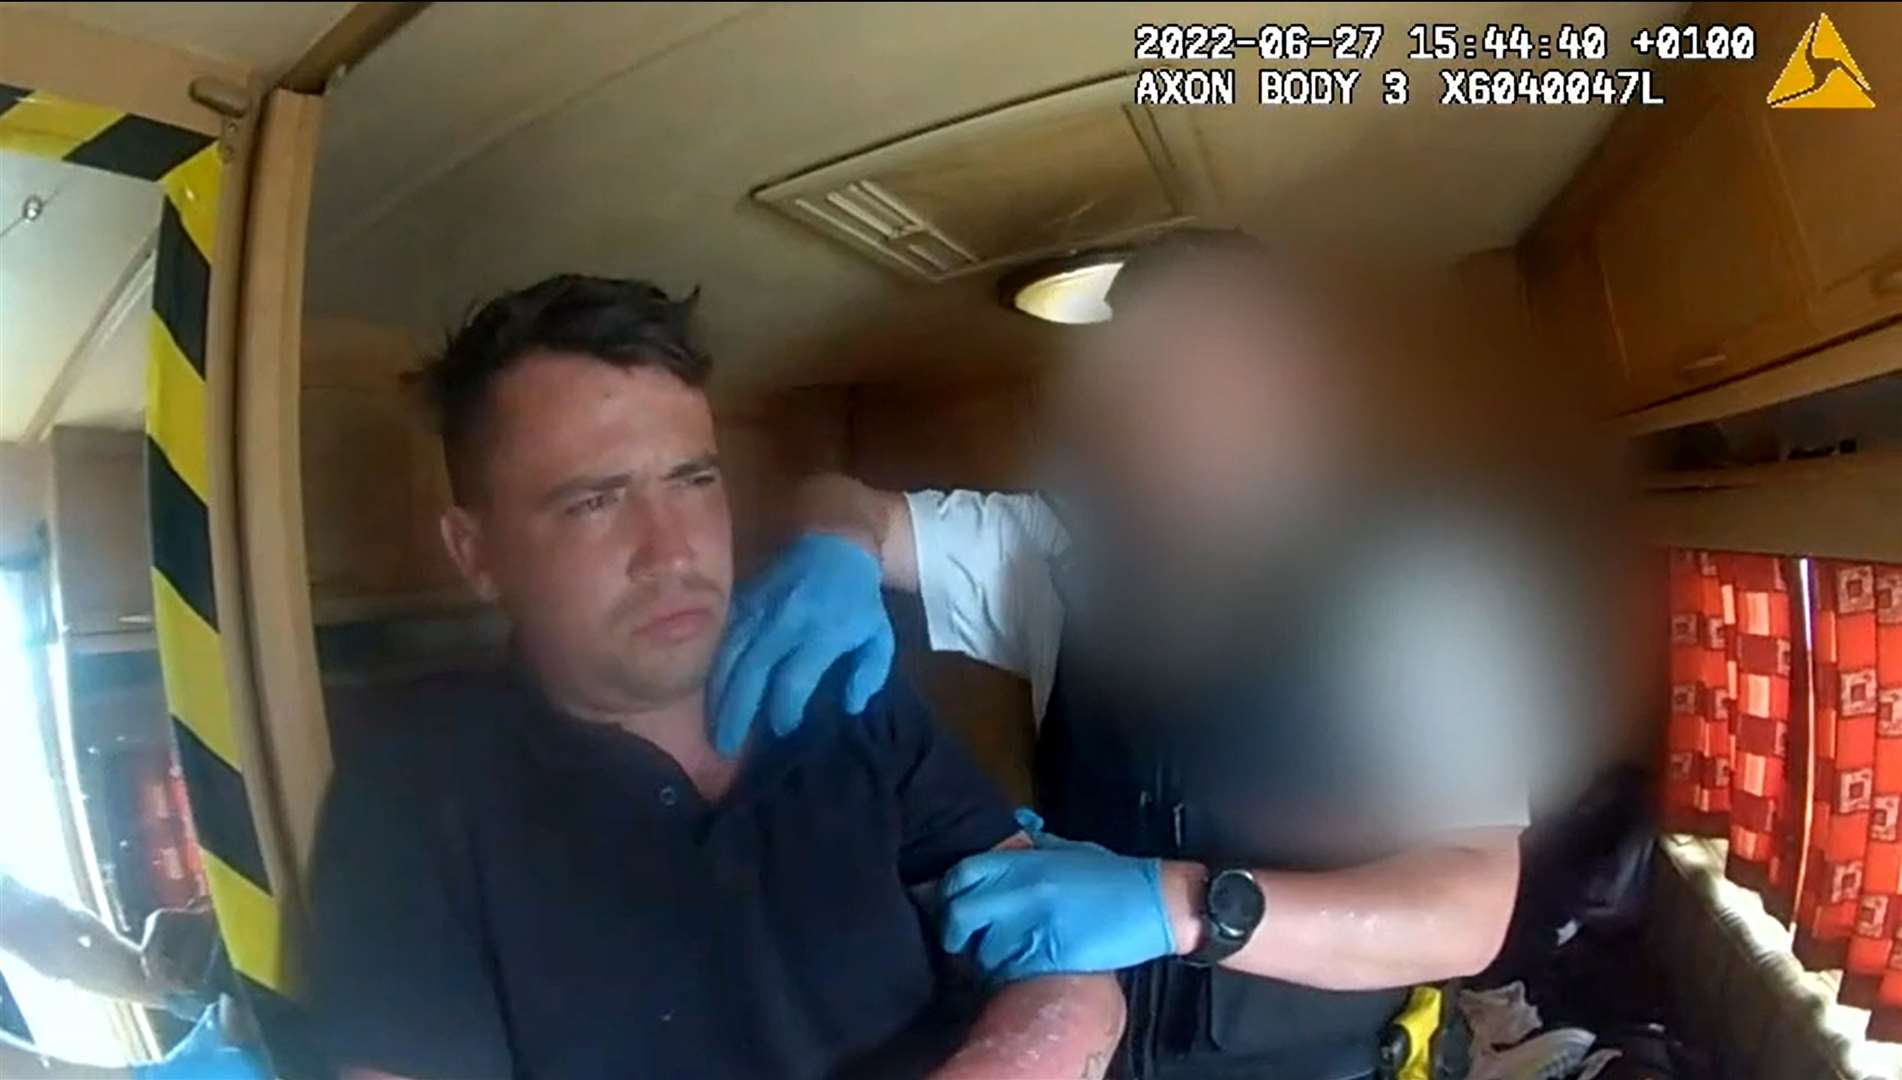 Body worn camera footage of Jordan McSweeney being arrested on June 27, roughly 36 hours after the attack on Zara Aleena (Met Police/PA)